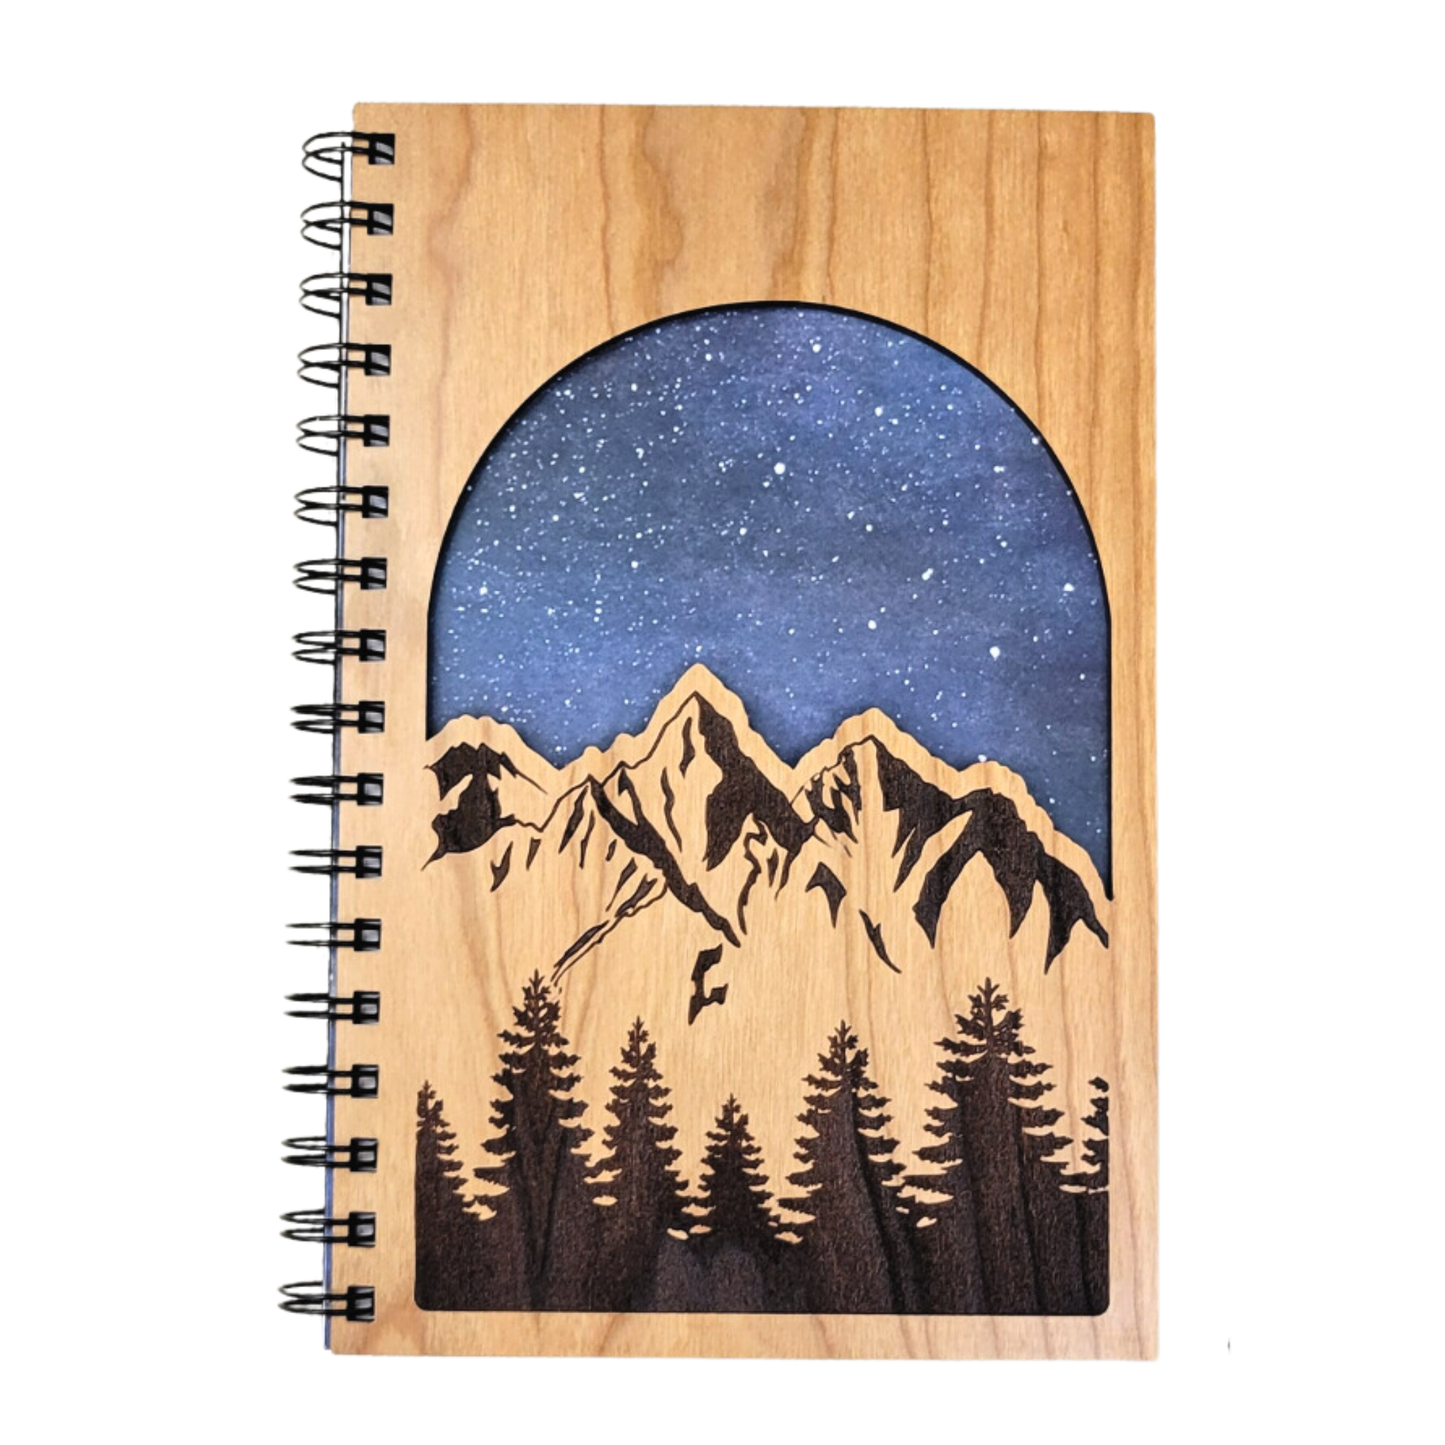 Starry mountains wood journal - stationery, journals: Blank